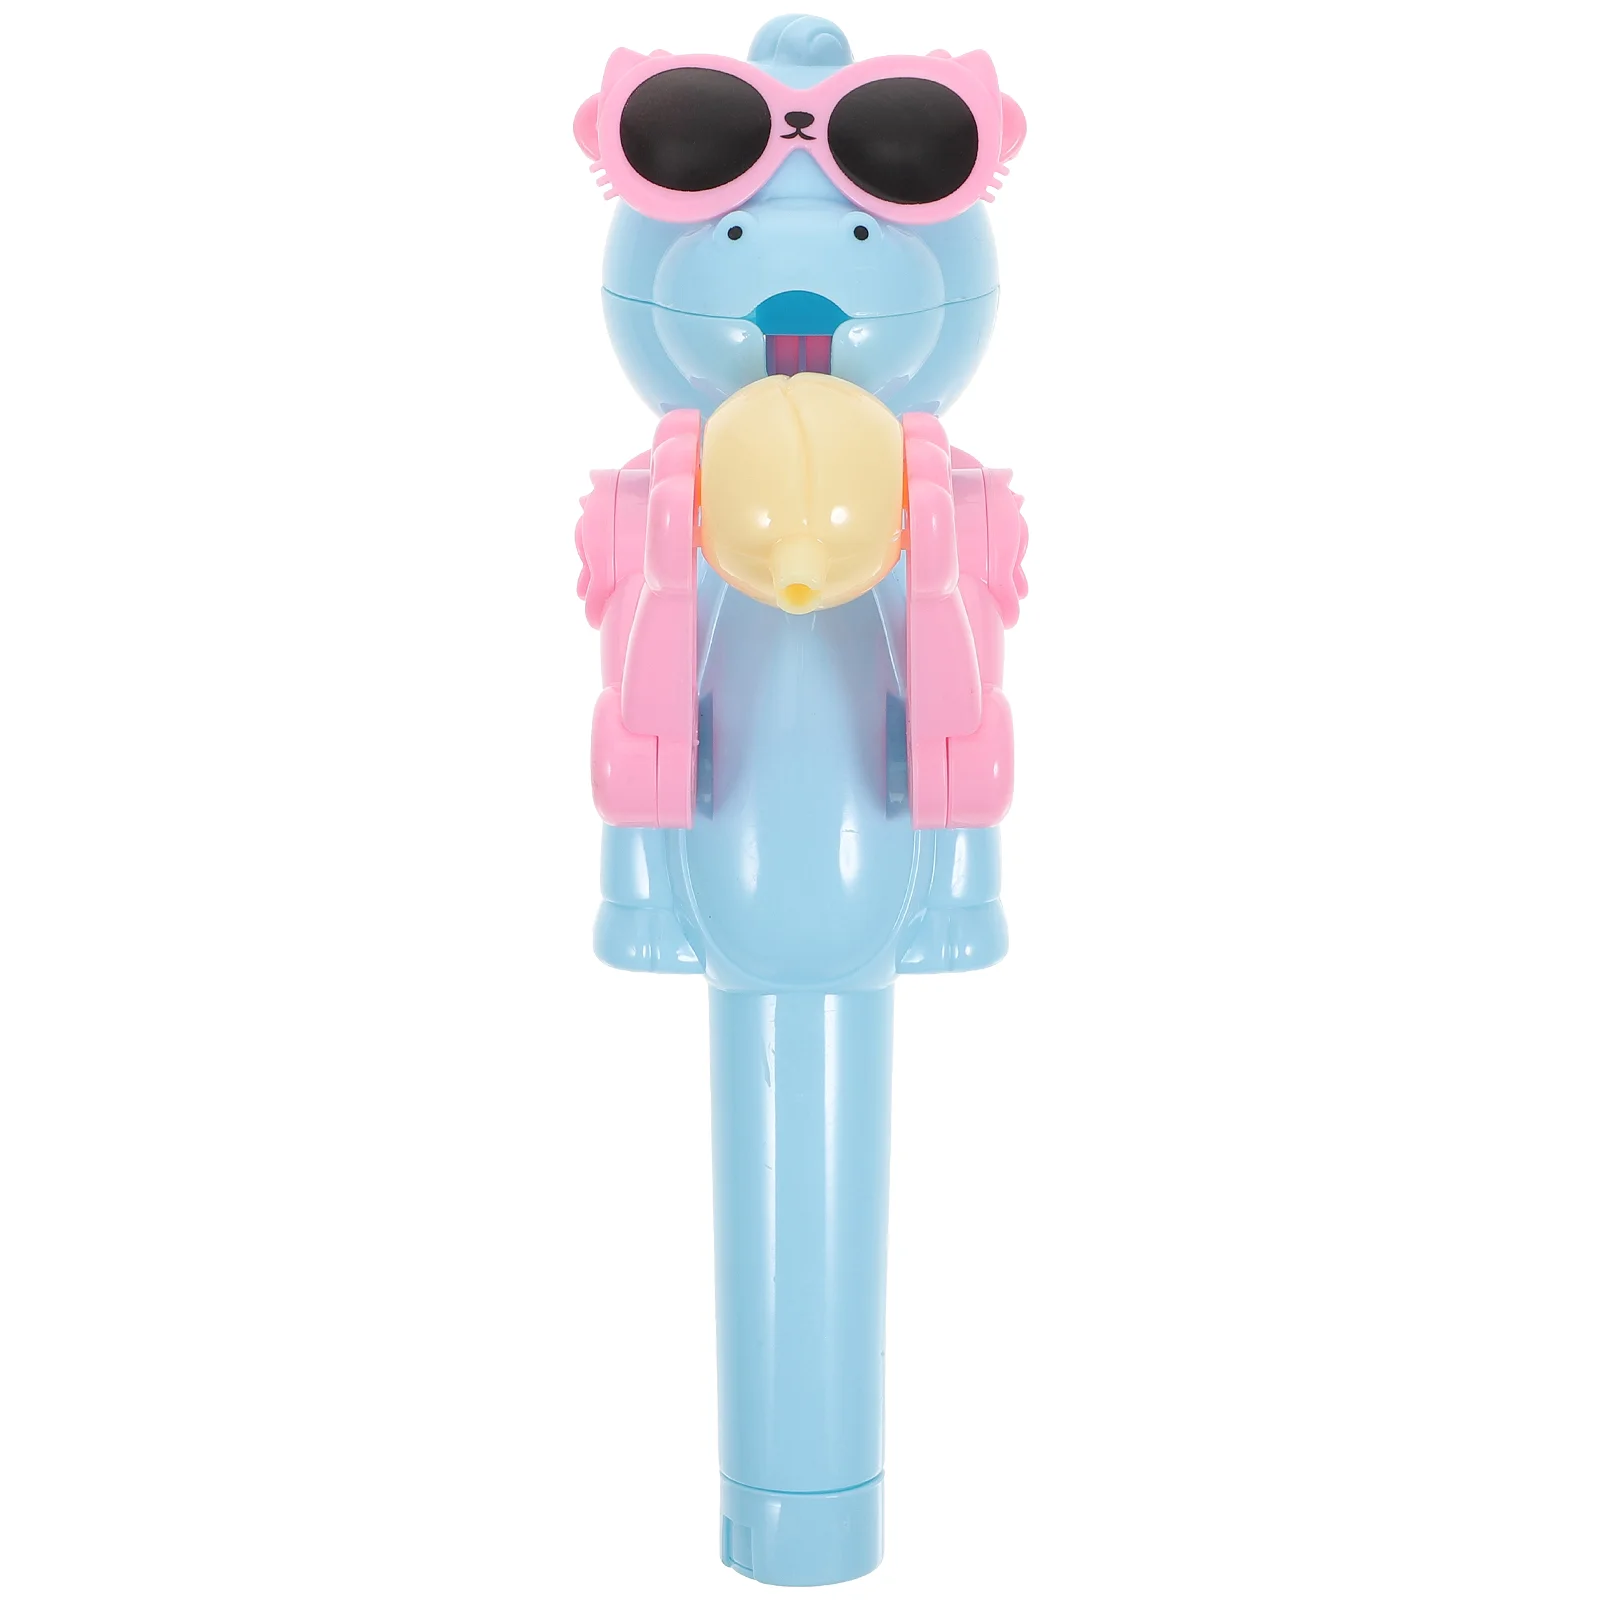 

Lollipop Machine Kids Plastic Relax Toy Favor Robot Case Funny Station Toys Lovely Holder Food Candy